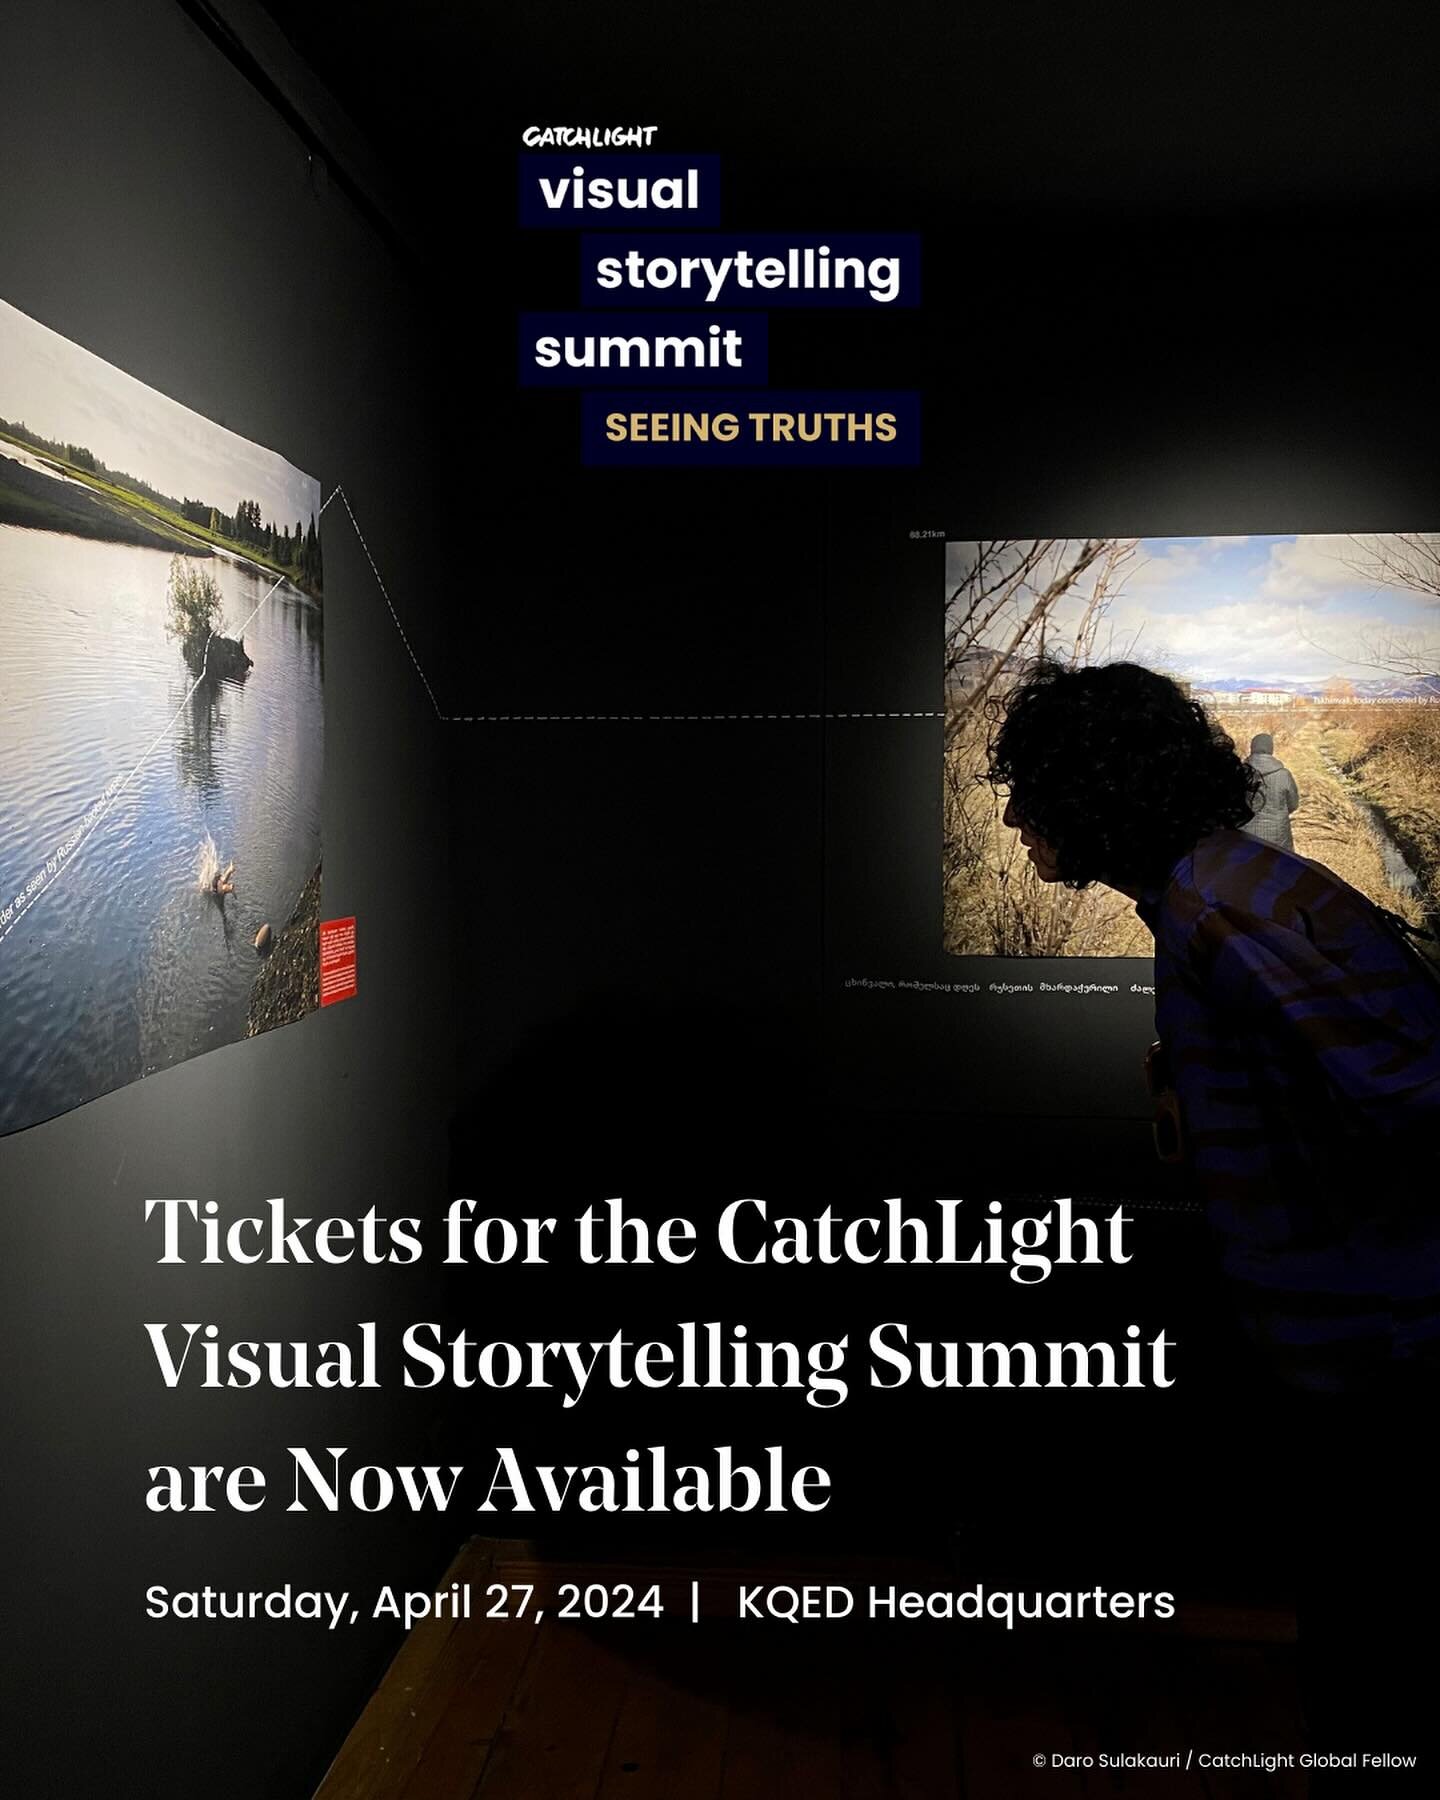 Registration is open for the 2024 CatchLight Visual Storytelling Summit. Join us on Saturday, April 27, @kqed for an immersive day of portfolio reviews, conversation, and community.  Seats are free but limited, so act fast. 

Want to dive deeper into